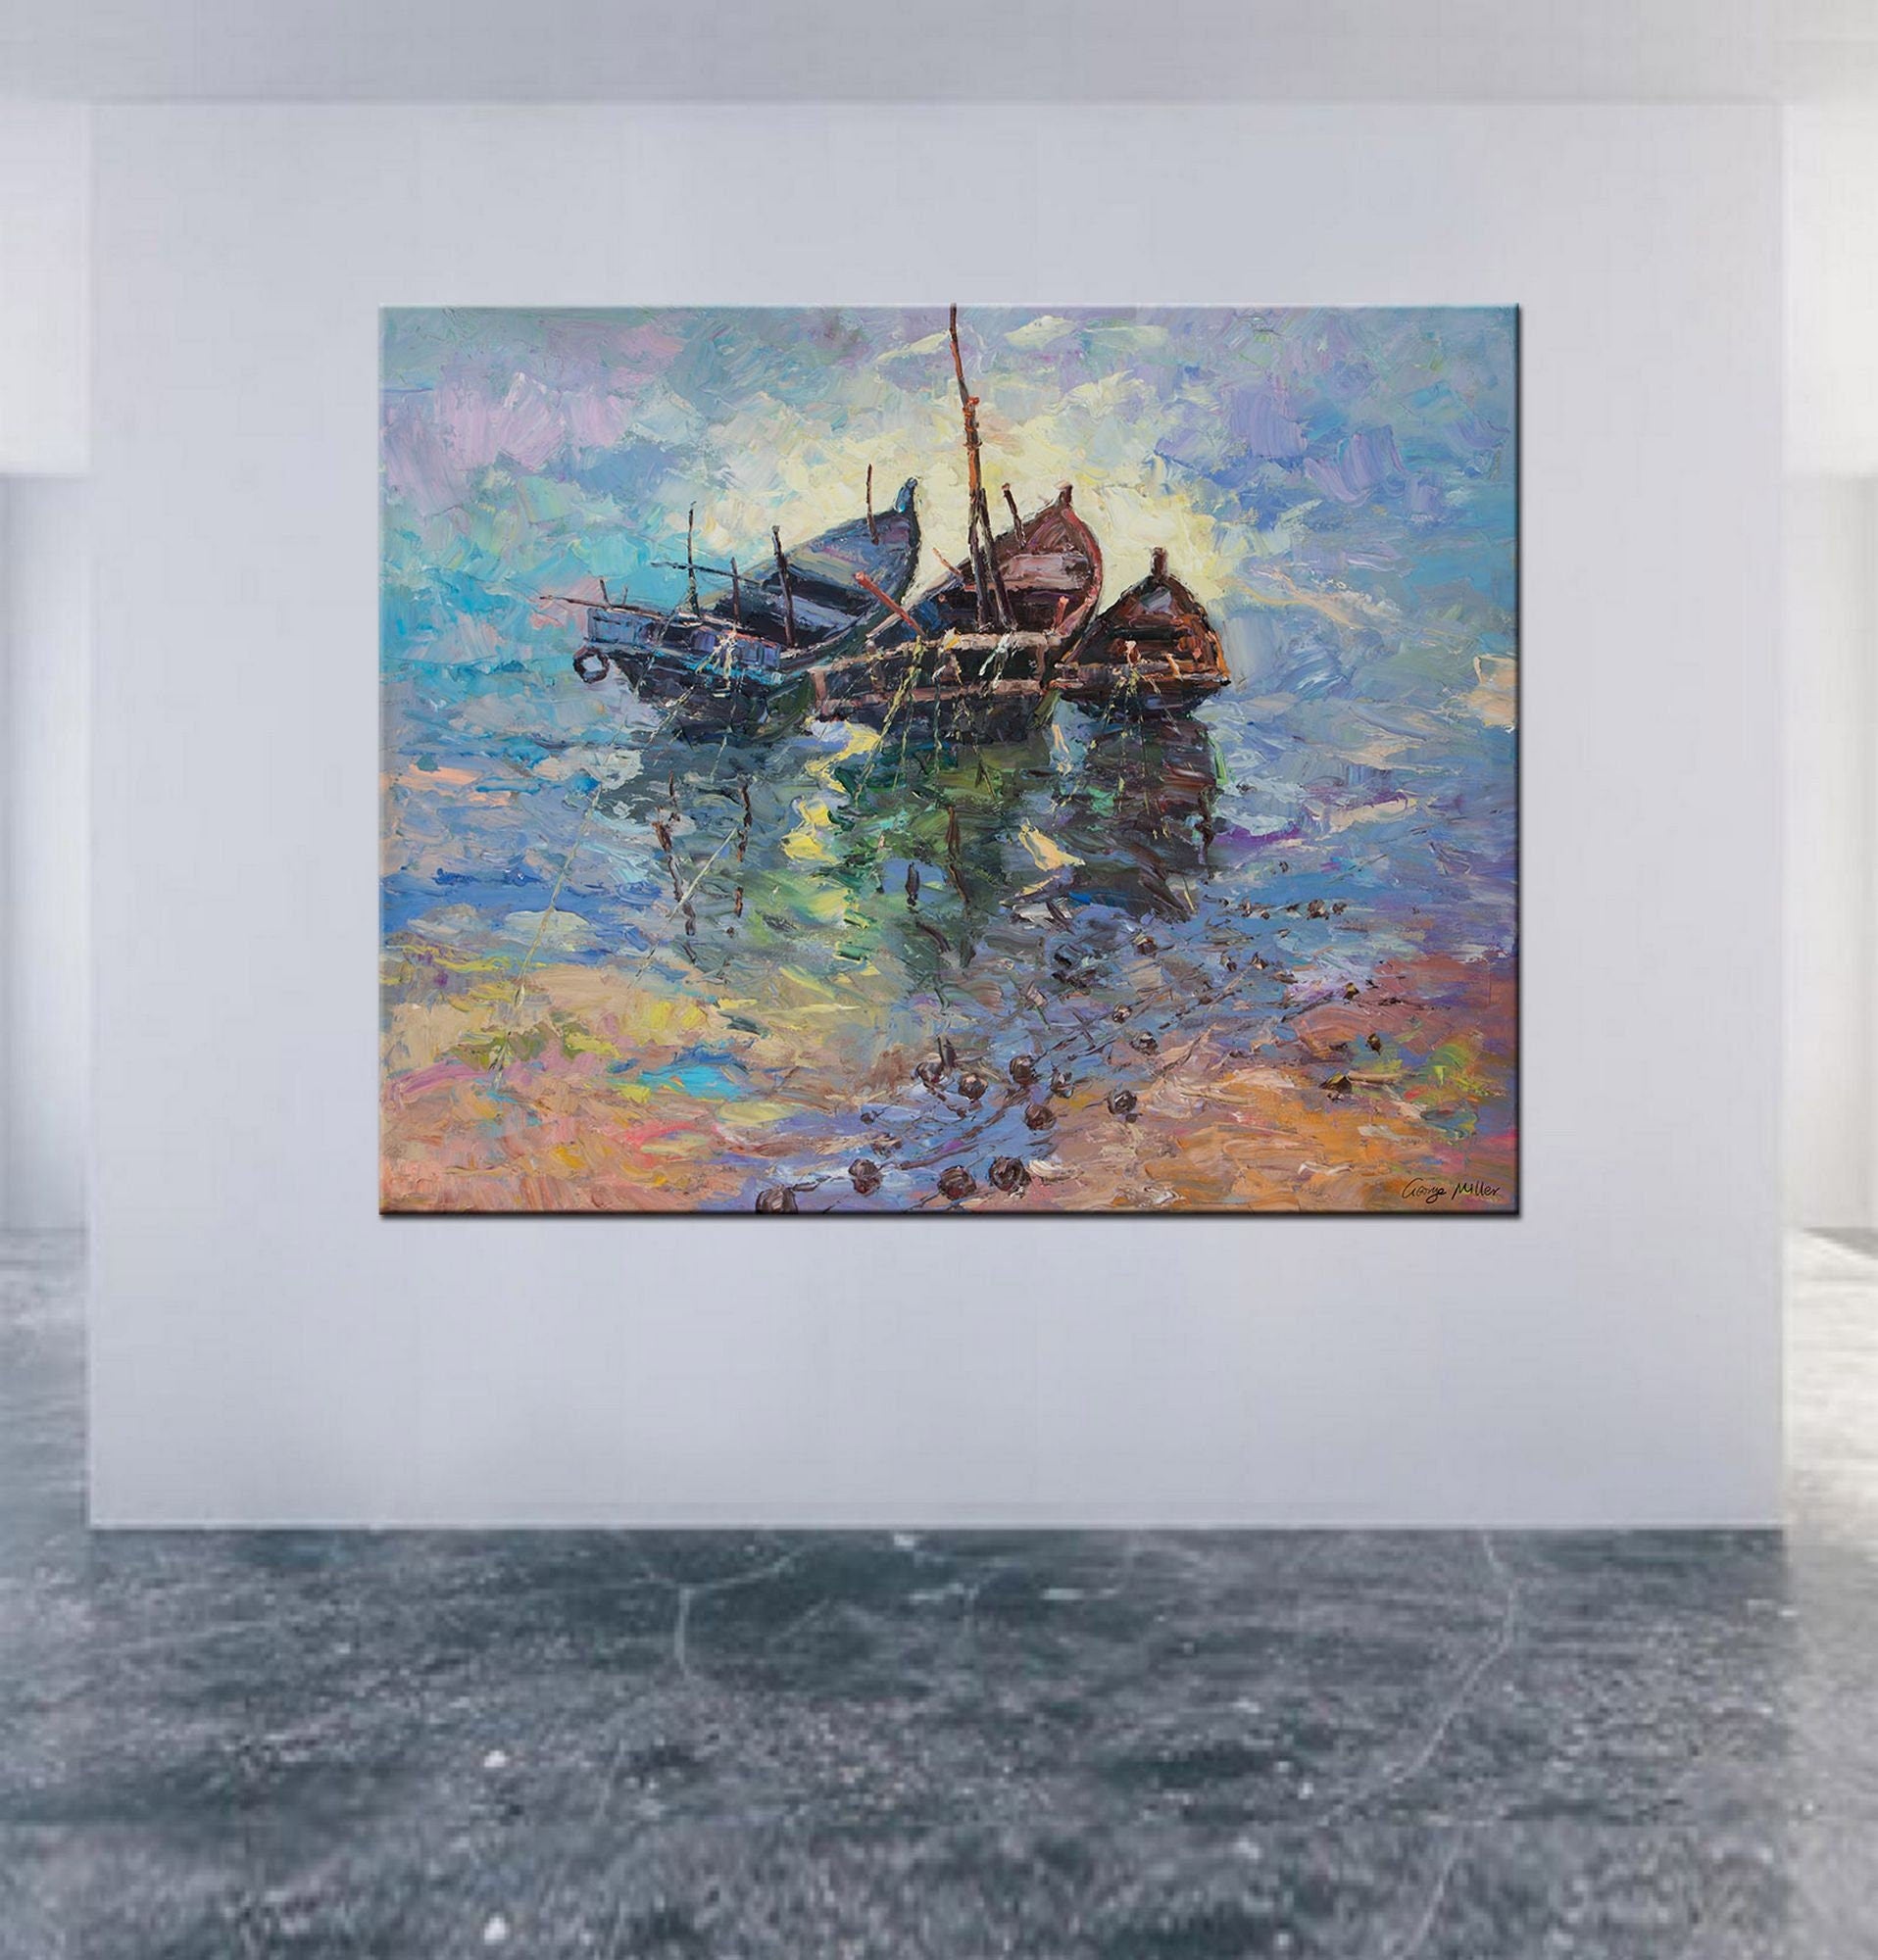 Large Oil Painting Fishing Boats at Sea, Canvas Painting, Contemporary Art, Living Room Decor, Large Oil Painting, Large Seascape Painting